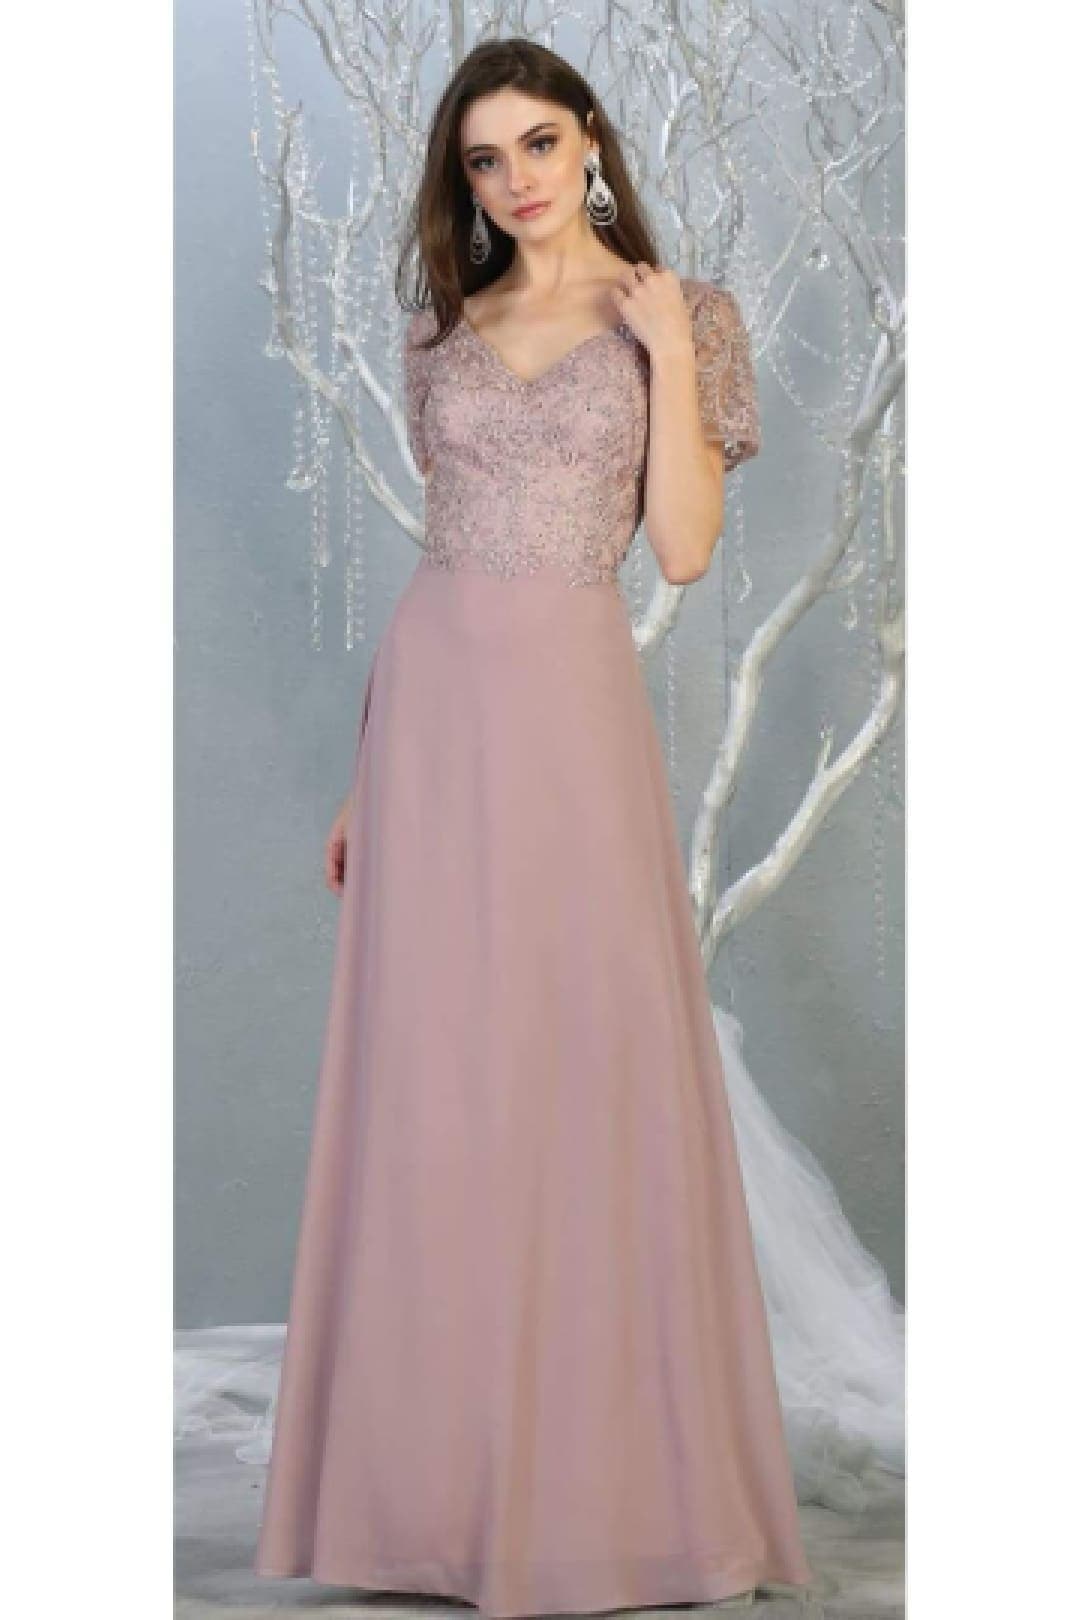 Mother Of The Bride Evening Gown - Dress